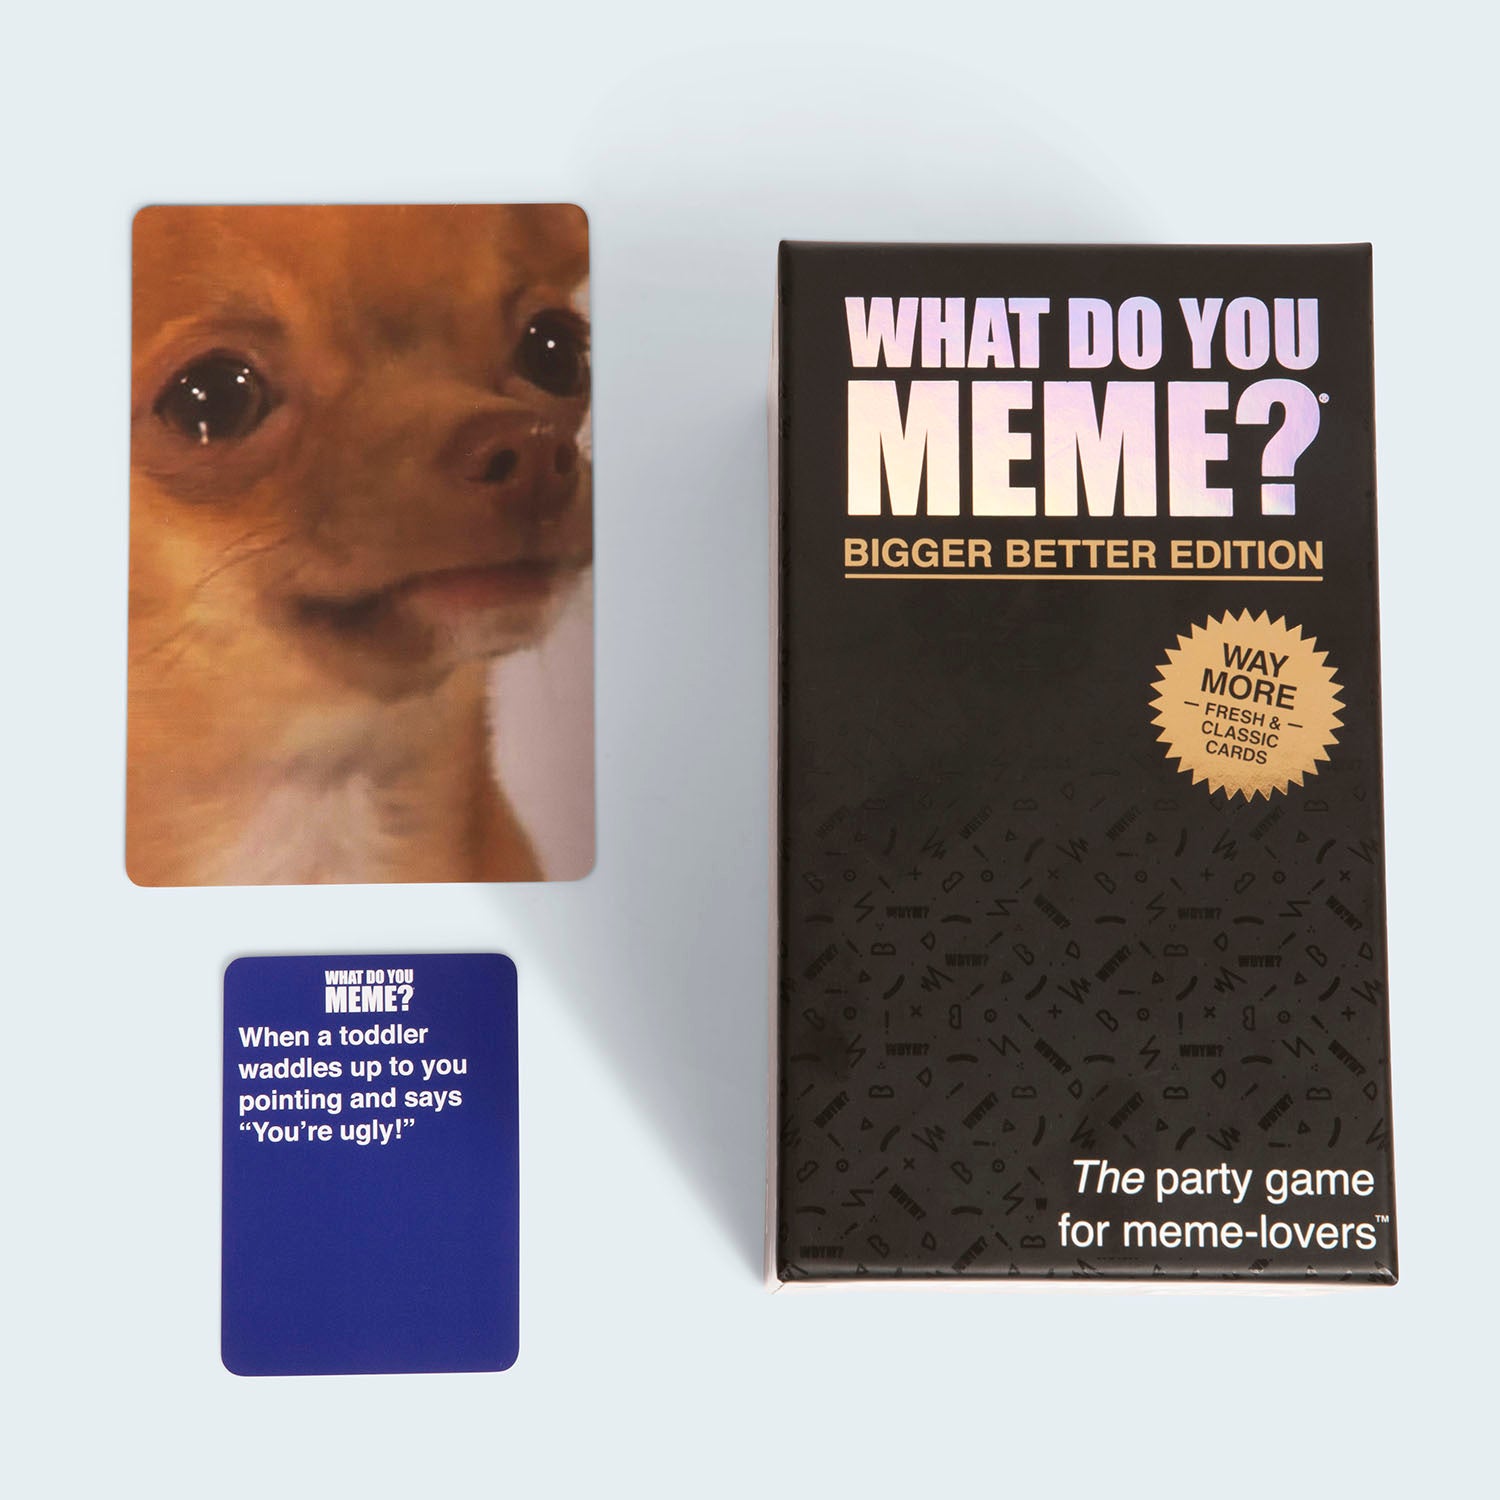 What Do You Meme?: The Laughs Are Worth the Price, meme game 